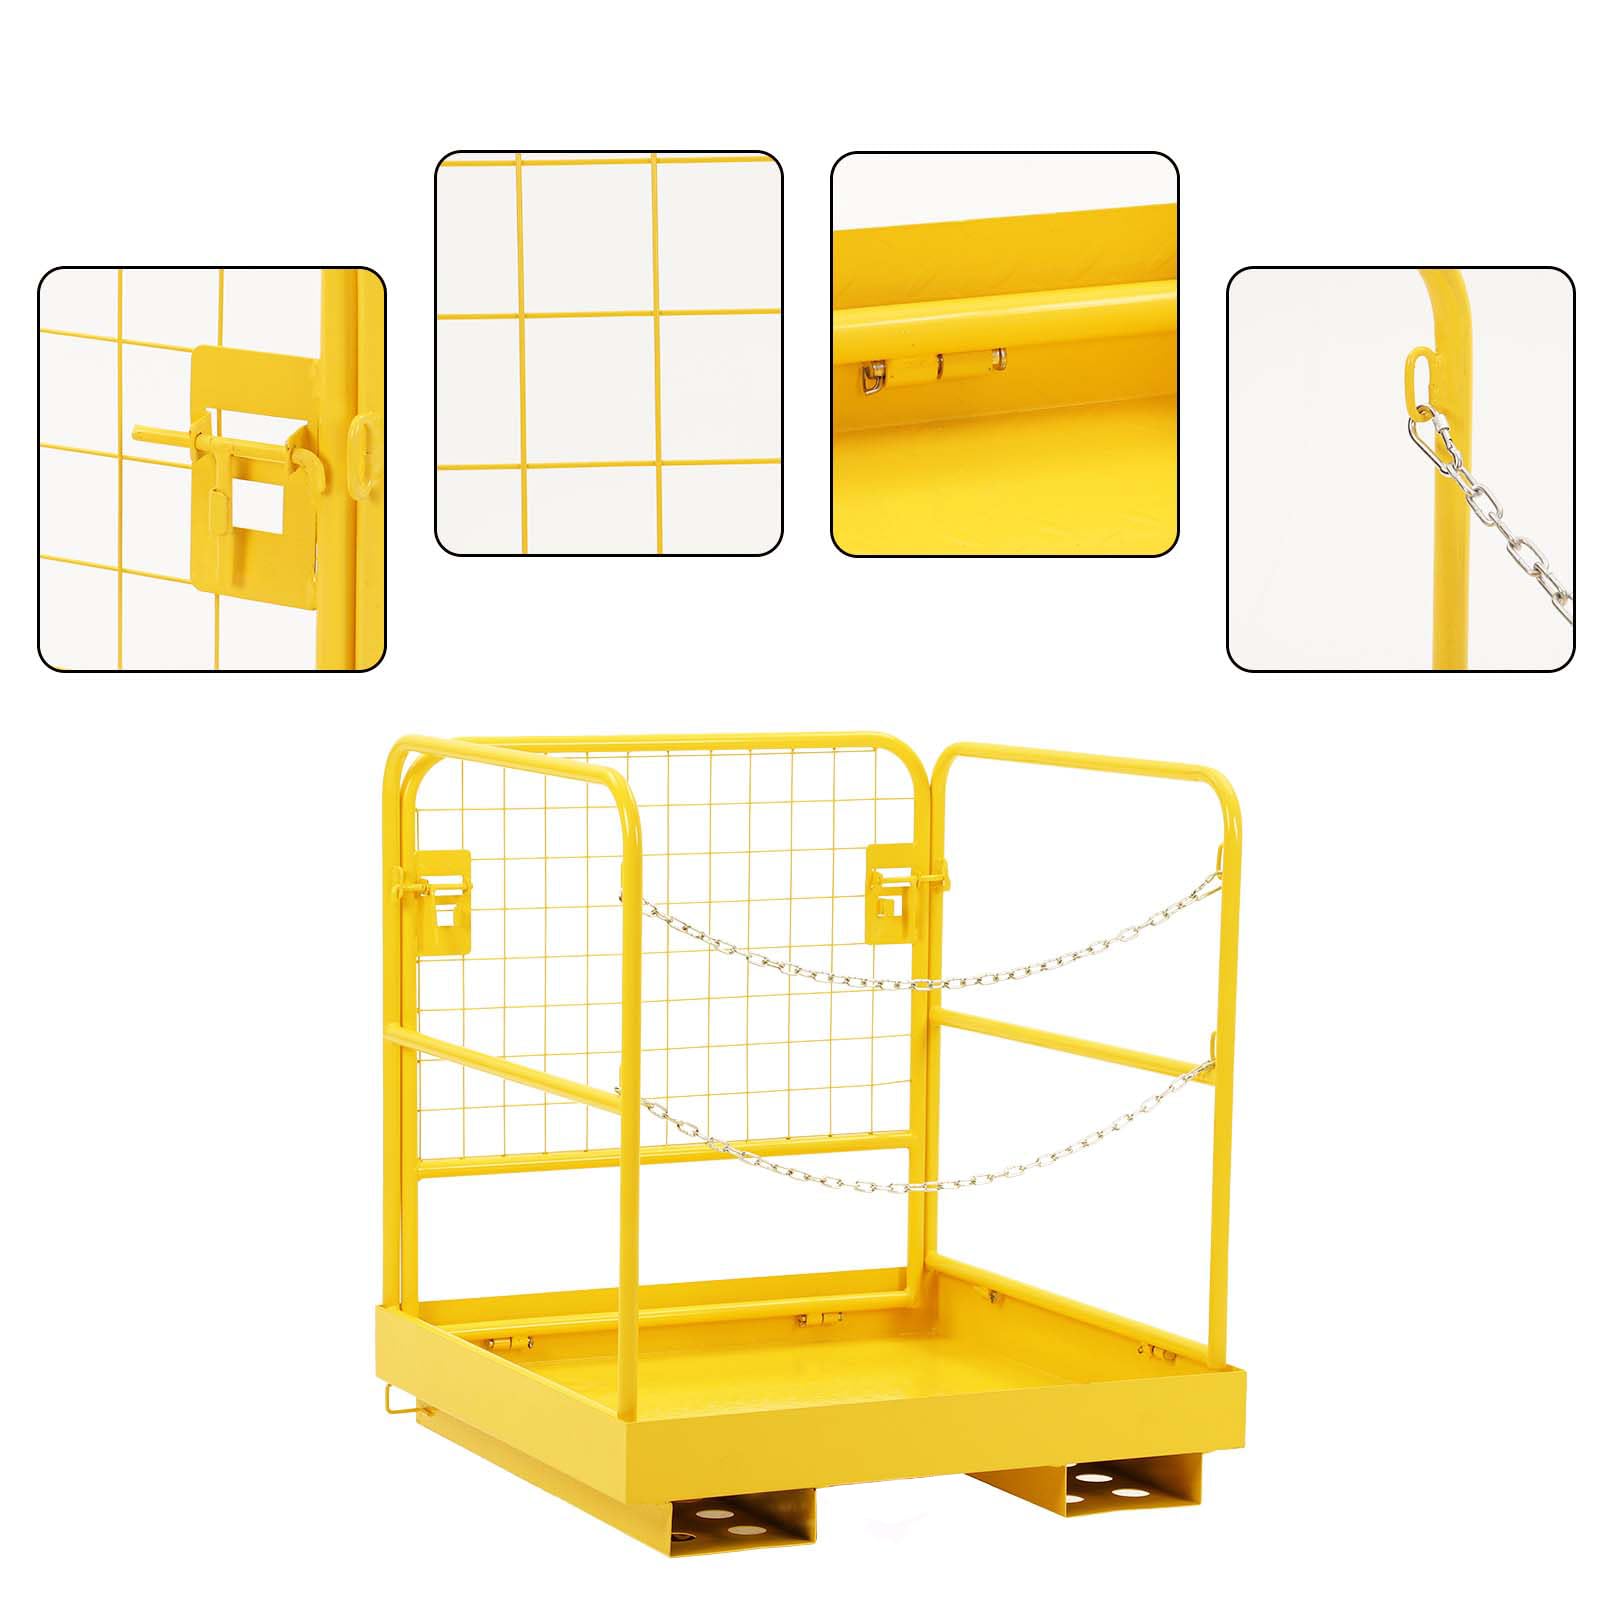 36" x 36" Forklift Safety Cage, 1200 LBS Capacity Forklift Work Platform, Aerial Platform Collapsible Lift Basket for Changing Lights, Painting, Roof Repair, Tree Service